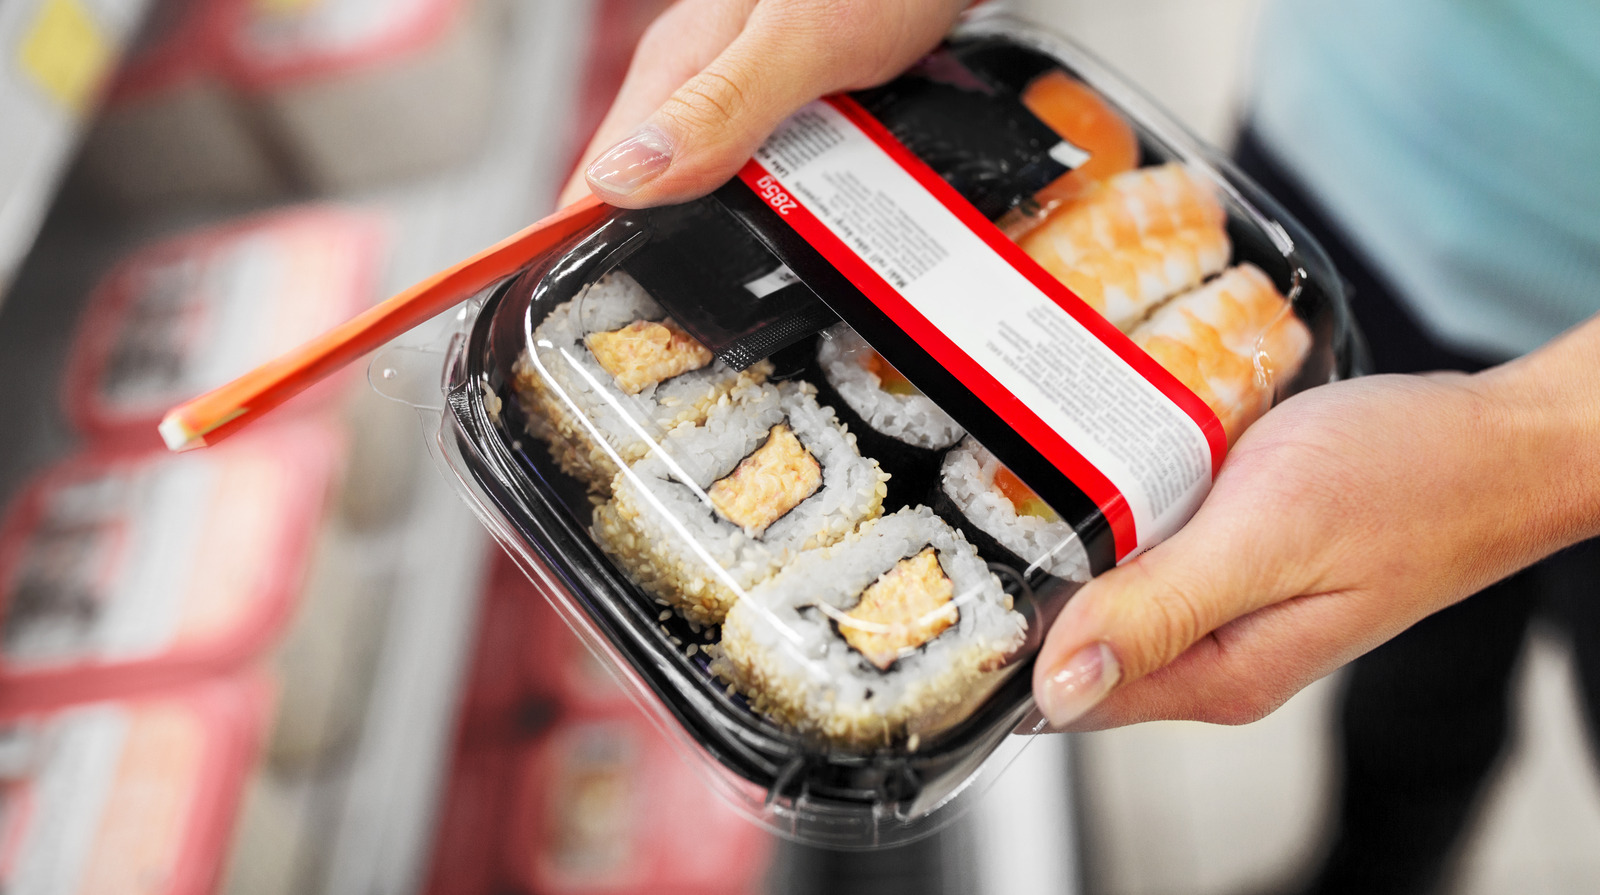 The Best Grocery Store Sushi According To Nearly 47% Of People